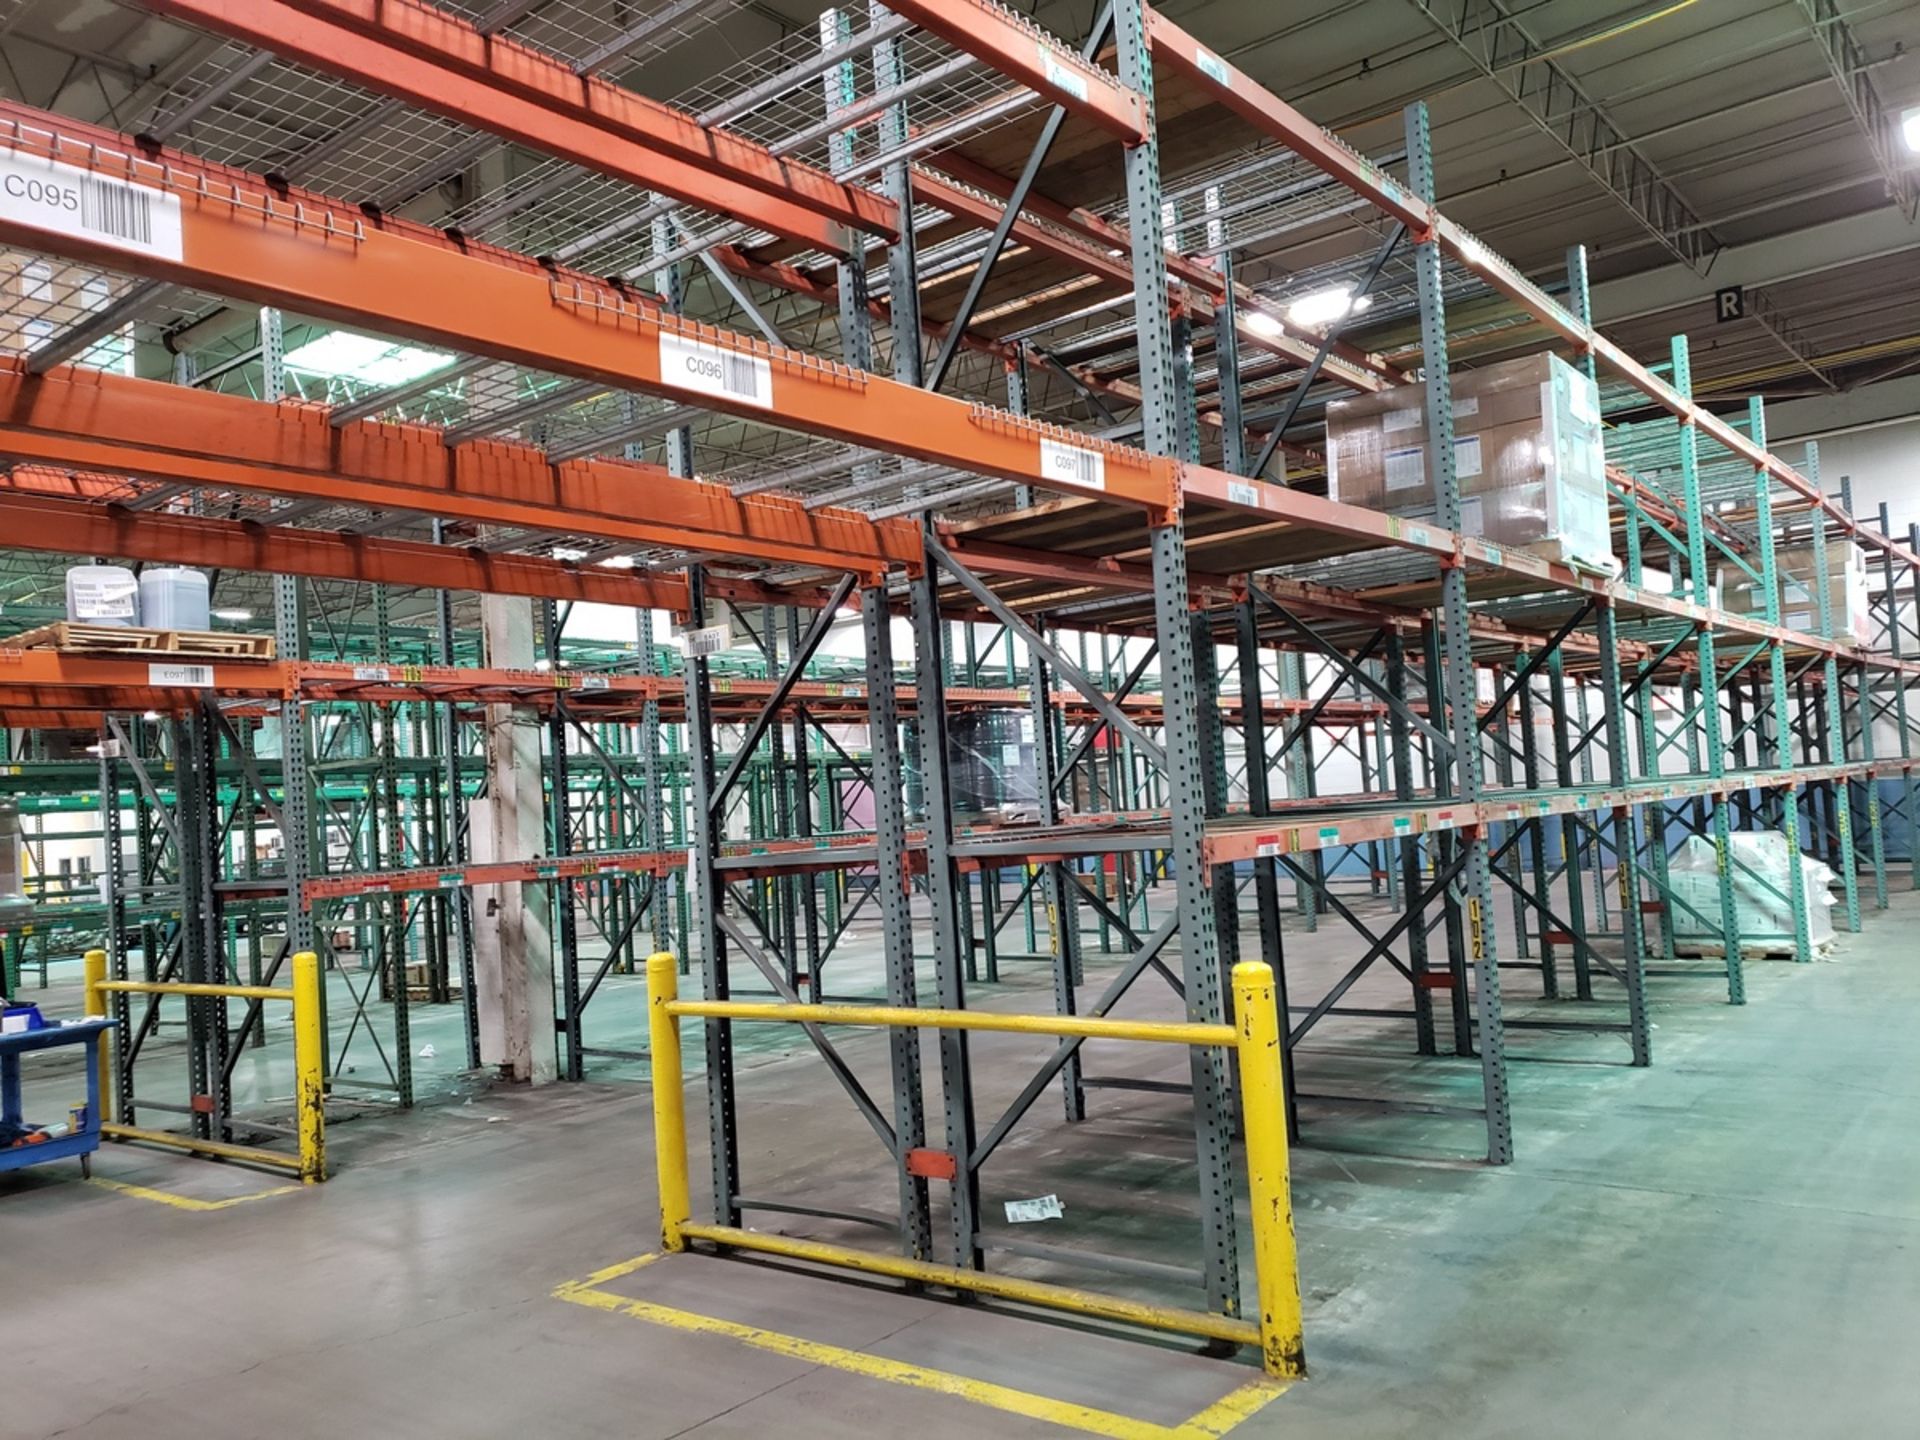 Pallet Rack Section, W/ (24) 42" X 15' Uprights, (23) 42" X 12' U - Subj to Bulk | Rig Fee: See Desc - Image 2 of 4